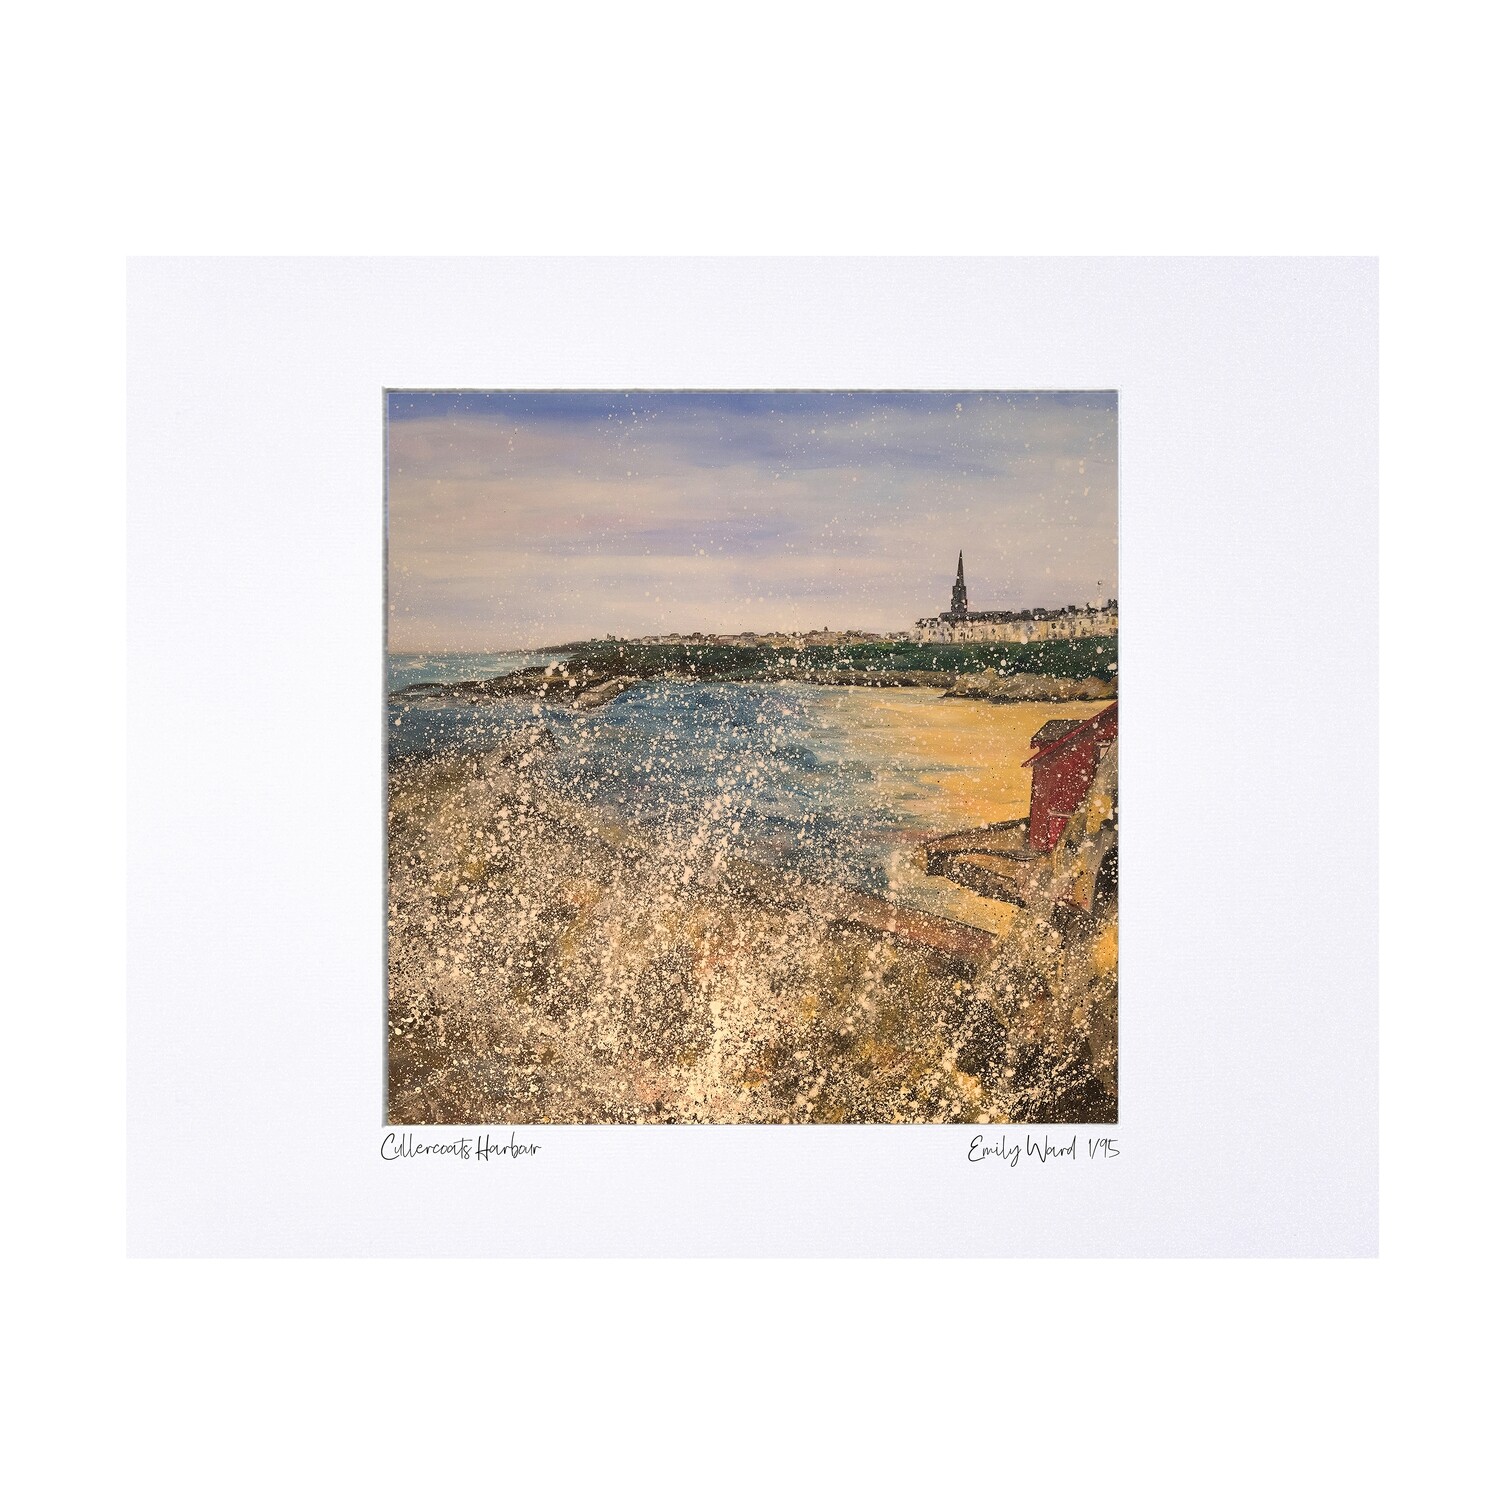 Cullercoats Harbour Print - Limited Edition